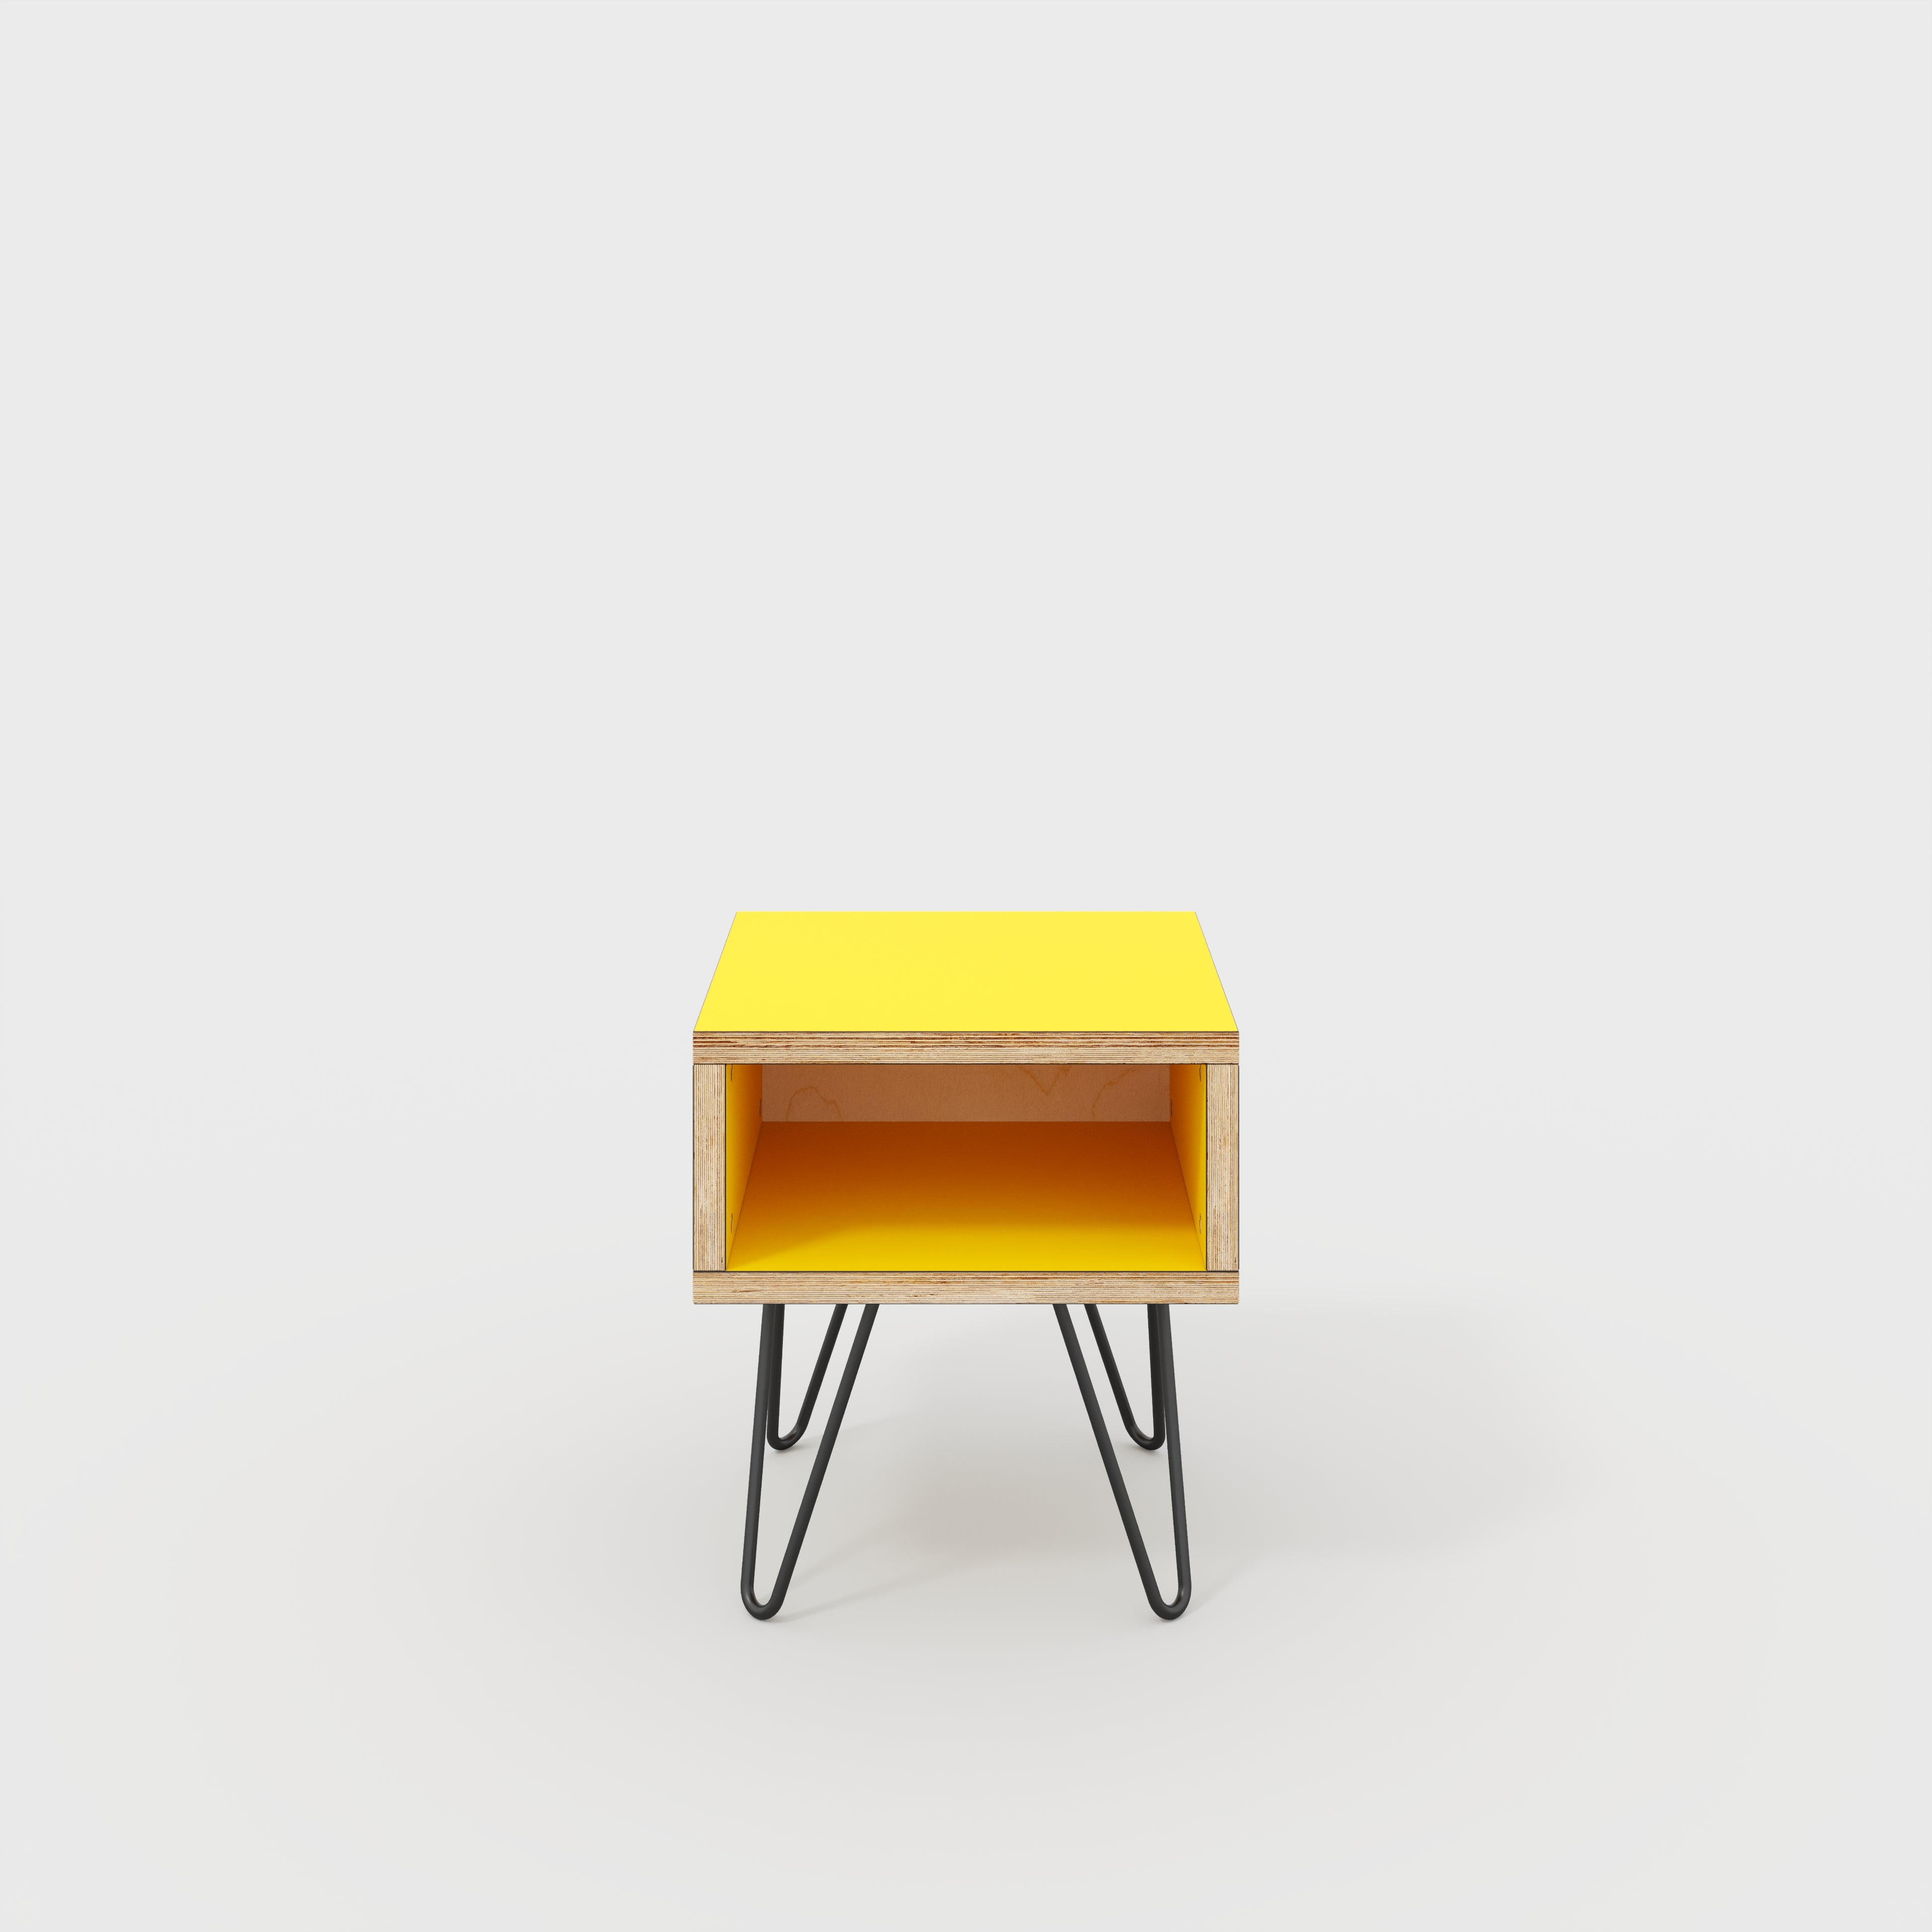 Bedside Table with Box Storage and Black Hairpin Legs - Formica Chrome Yellow - 400(w) x 400(d) x 450(h)